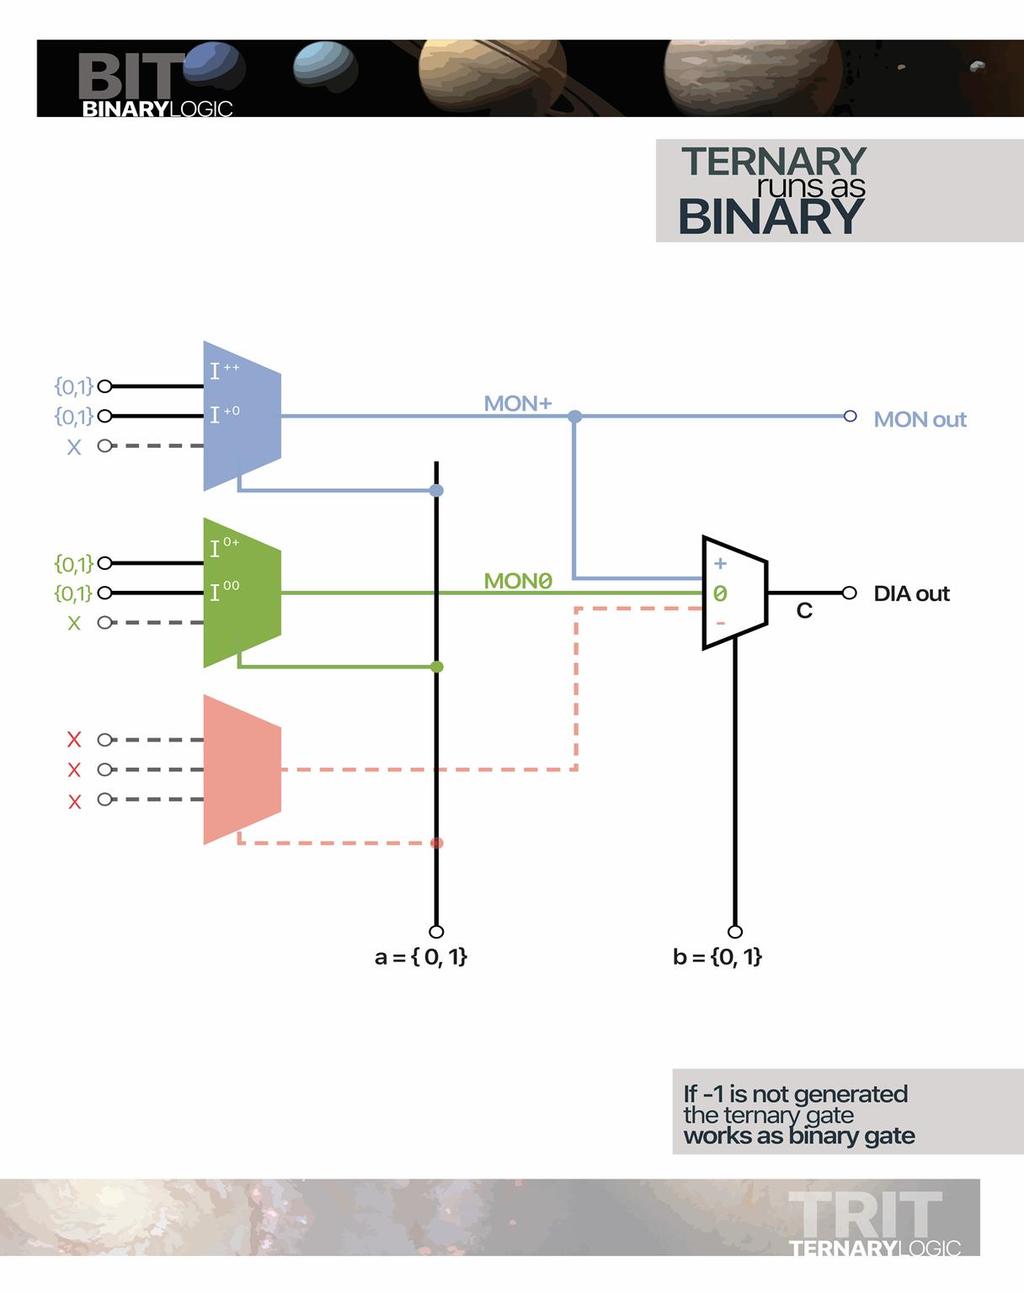 6.0 Ternary-Binary Compatibility If the generation of 1 is blocked by software, the board creates a "Universal Programmable Binary Gate" with which to obtain all 16 dyadic functions and 4 monadic